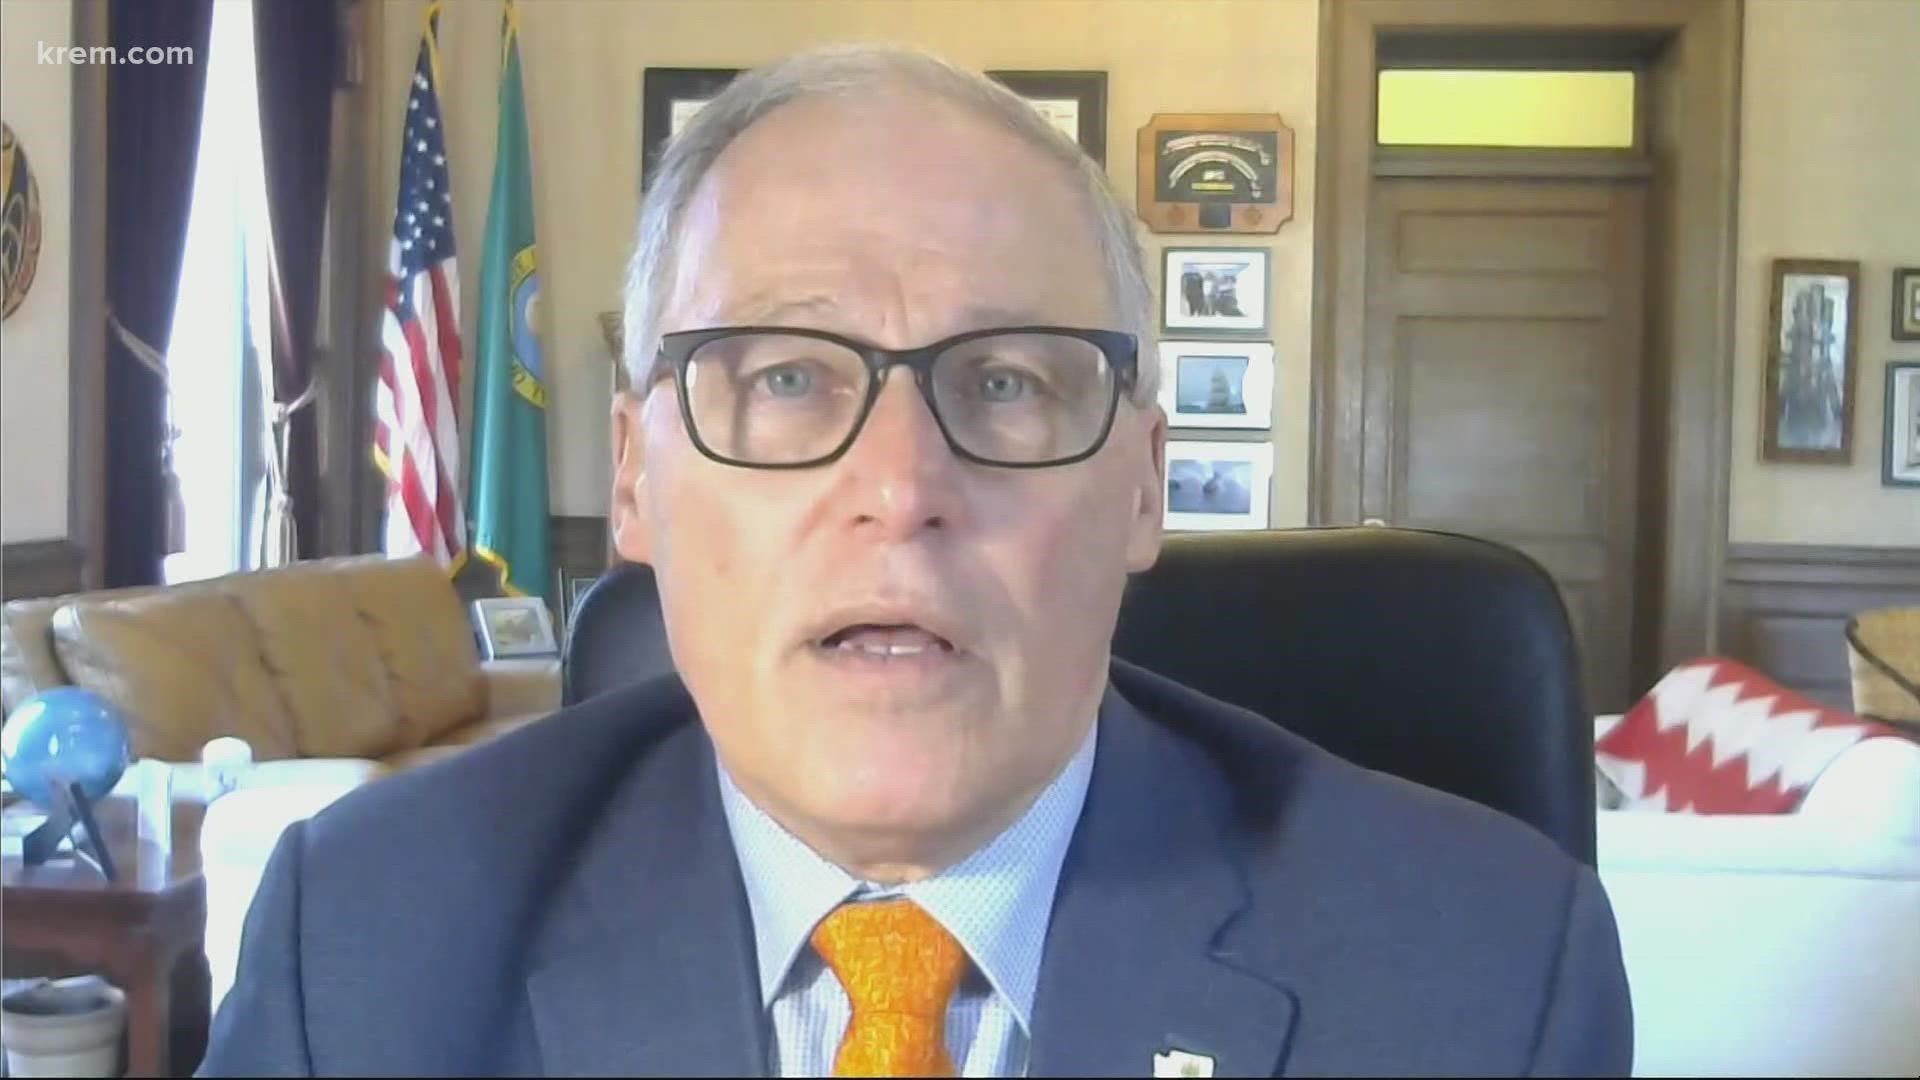 Inslee is also dedicating resources to make it easier to discharge patients to long-term care facilities and asking retired healthcare workers to temporarily return.